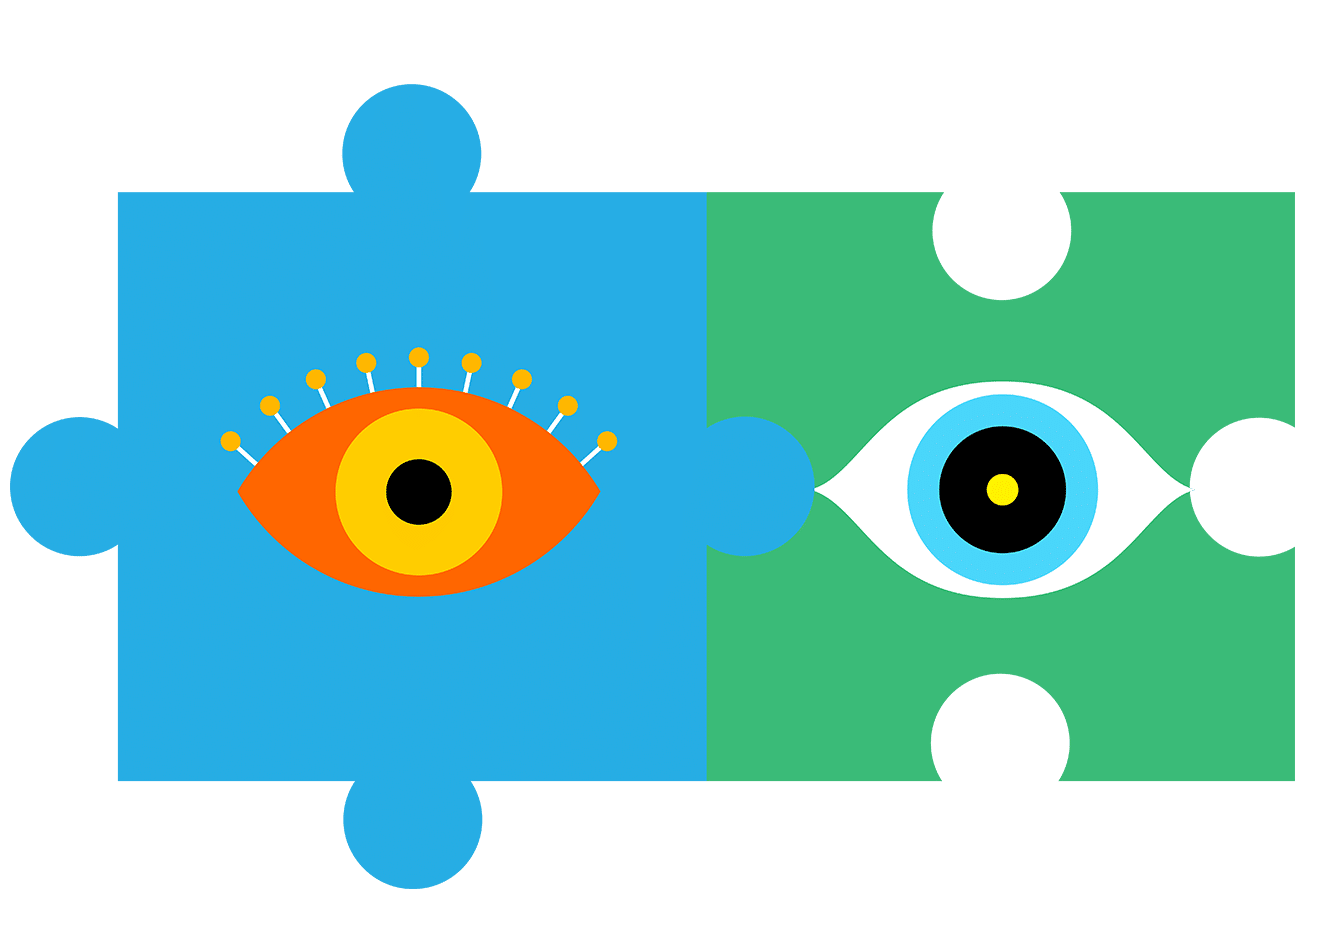 Illustration: two puzzle pieces fitted together. One is a blue puzzle piece with an orange and yellow coloured eye on it. The other is a green puzzle piece with a blue and white coloured eye on it. Concept represents Two-Eyed Seeing.